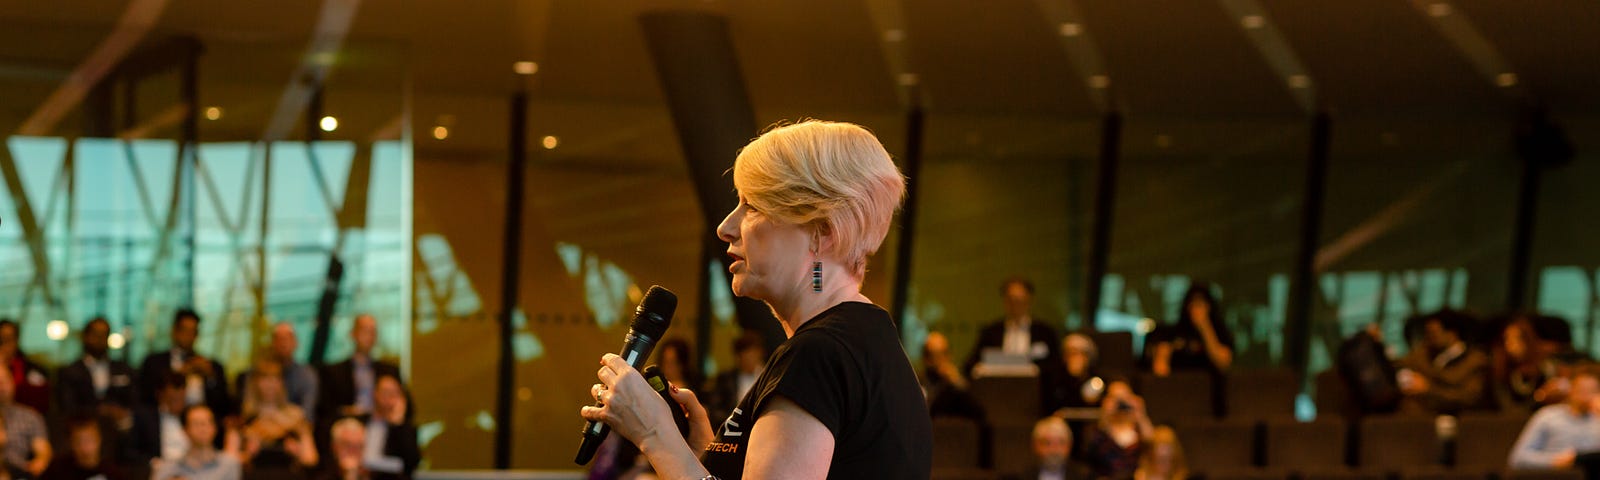 Professor Rose Luckin, Director of EDUCATE, stands with a microphone in front of a large audience at London’s City Hall